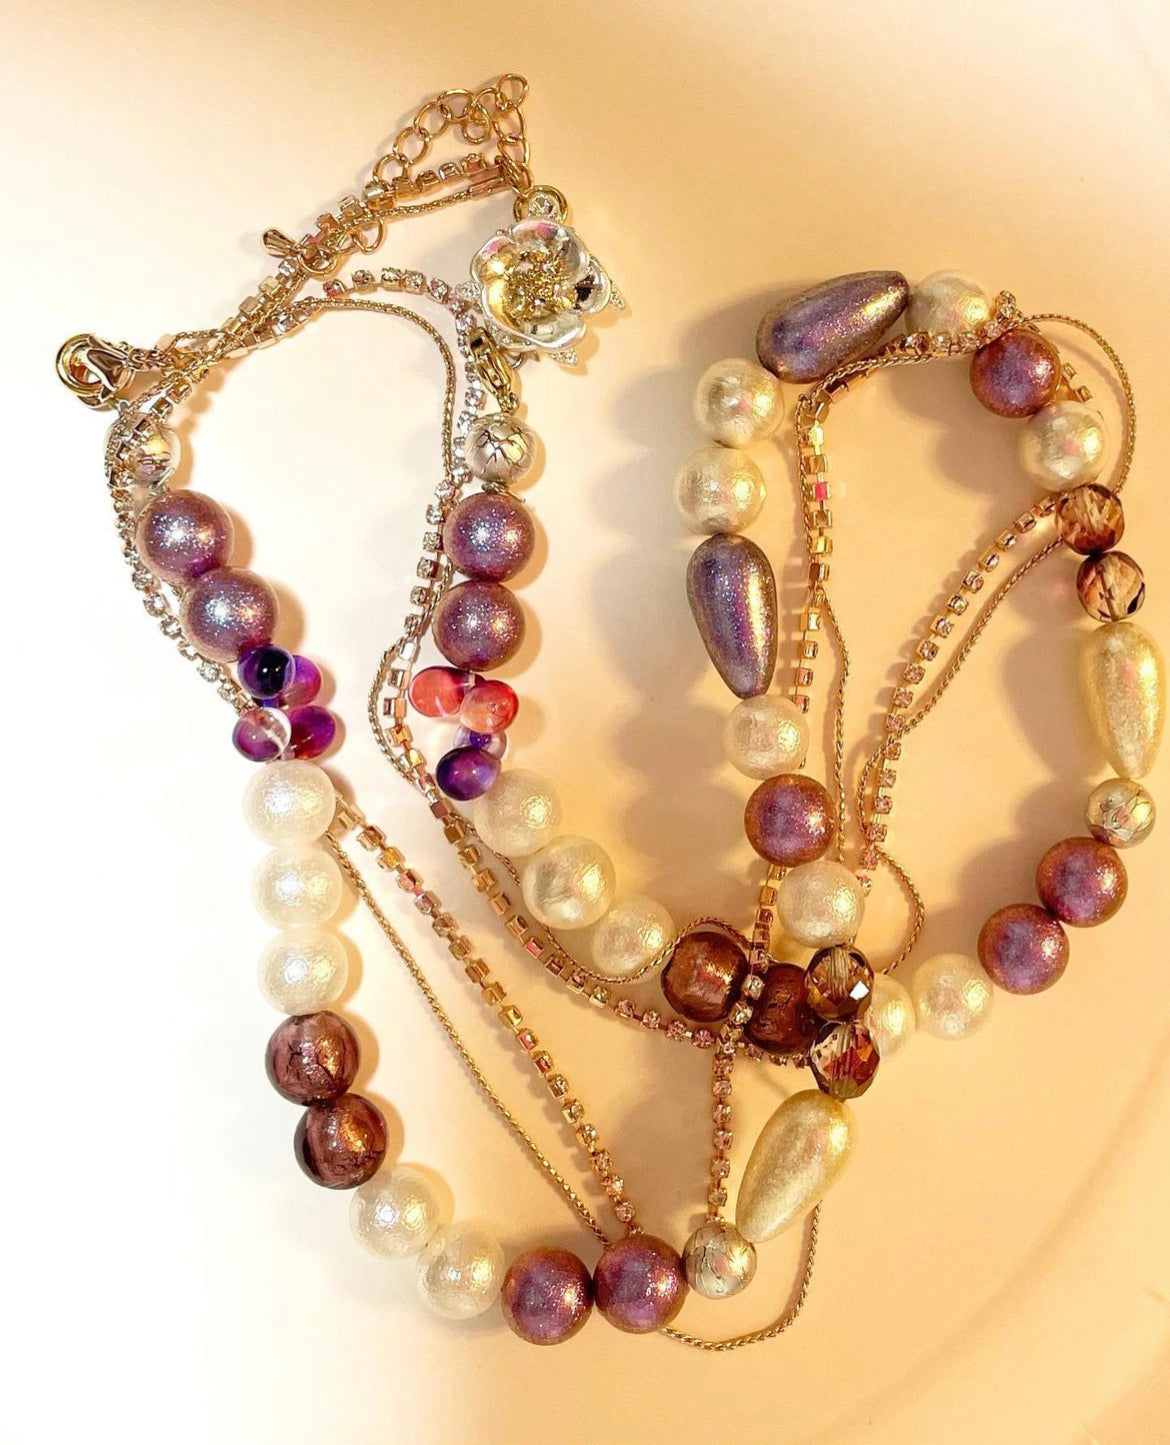 Beads-pearls-chain multi-use holder cum necklace